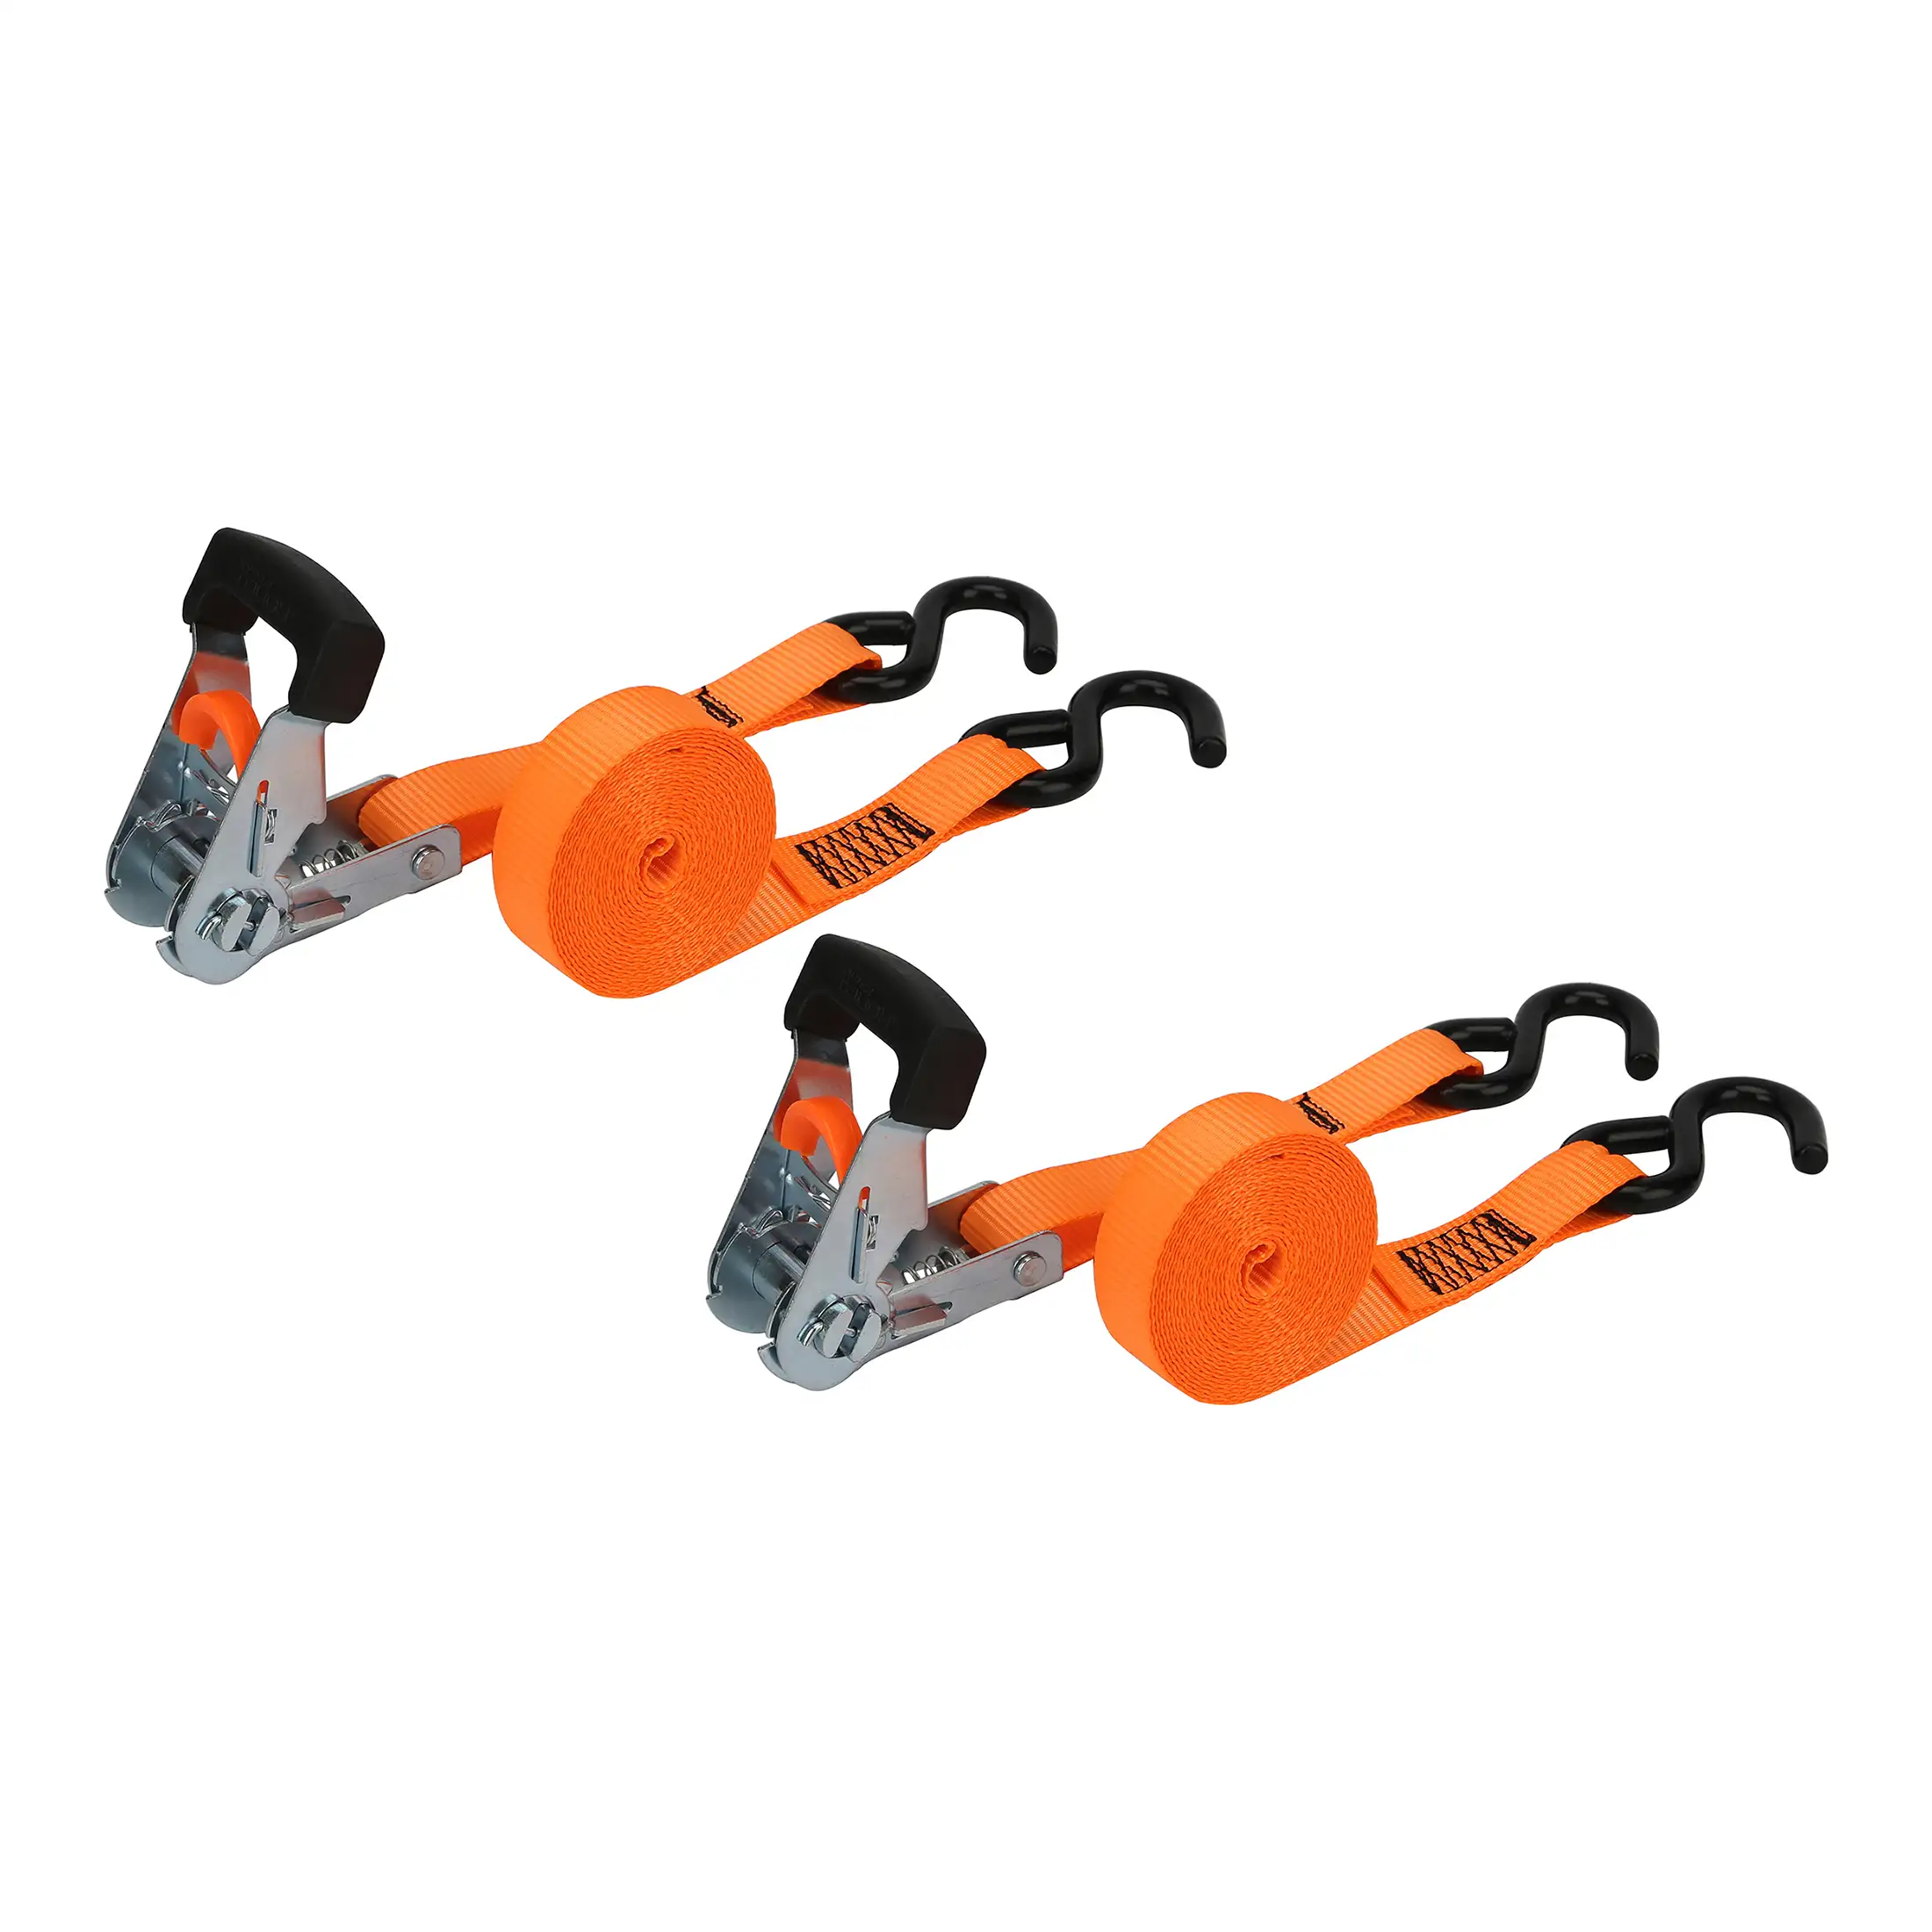 Hyper Tough Brand 1x14' Tie-Downs Ratchet 1000lbs Work Load with S Hooks 2 - Pack, Size: 1in x 14ft